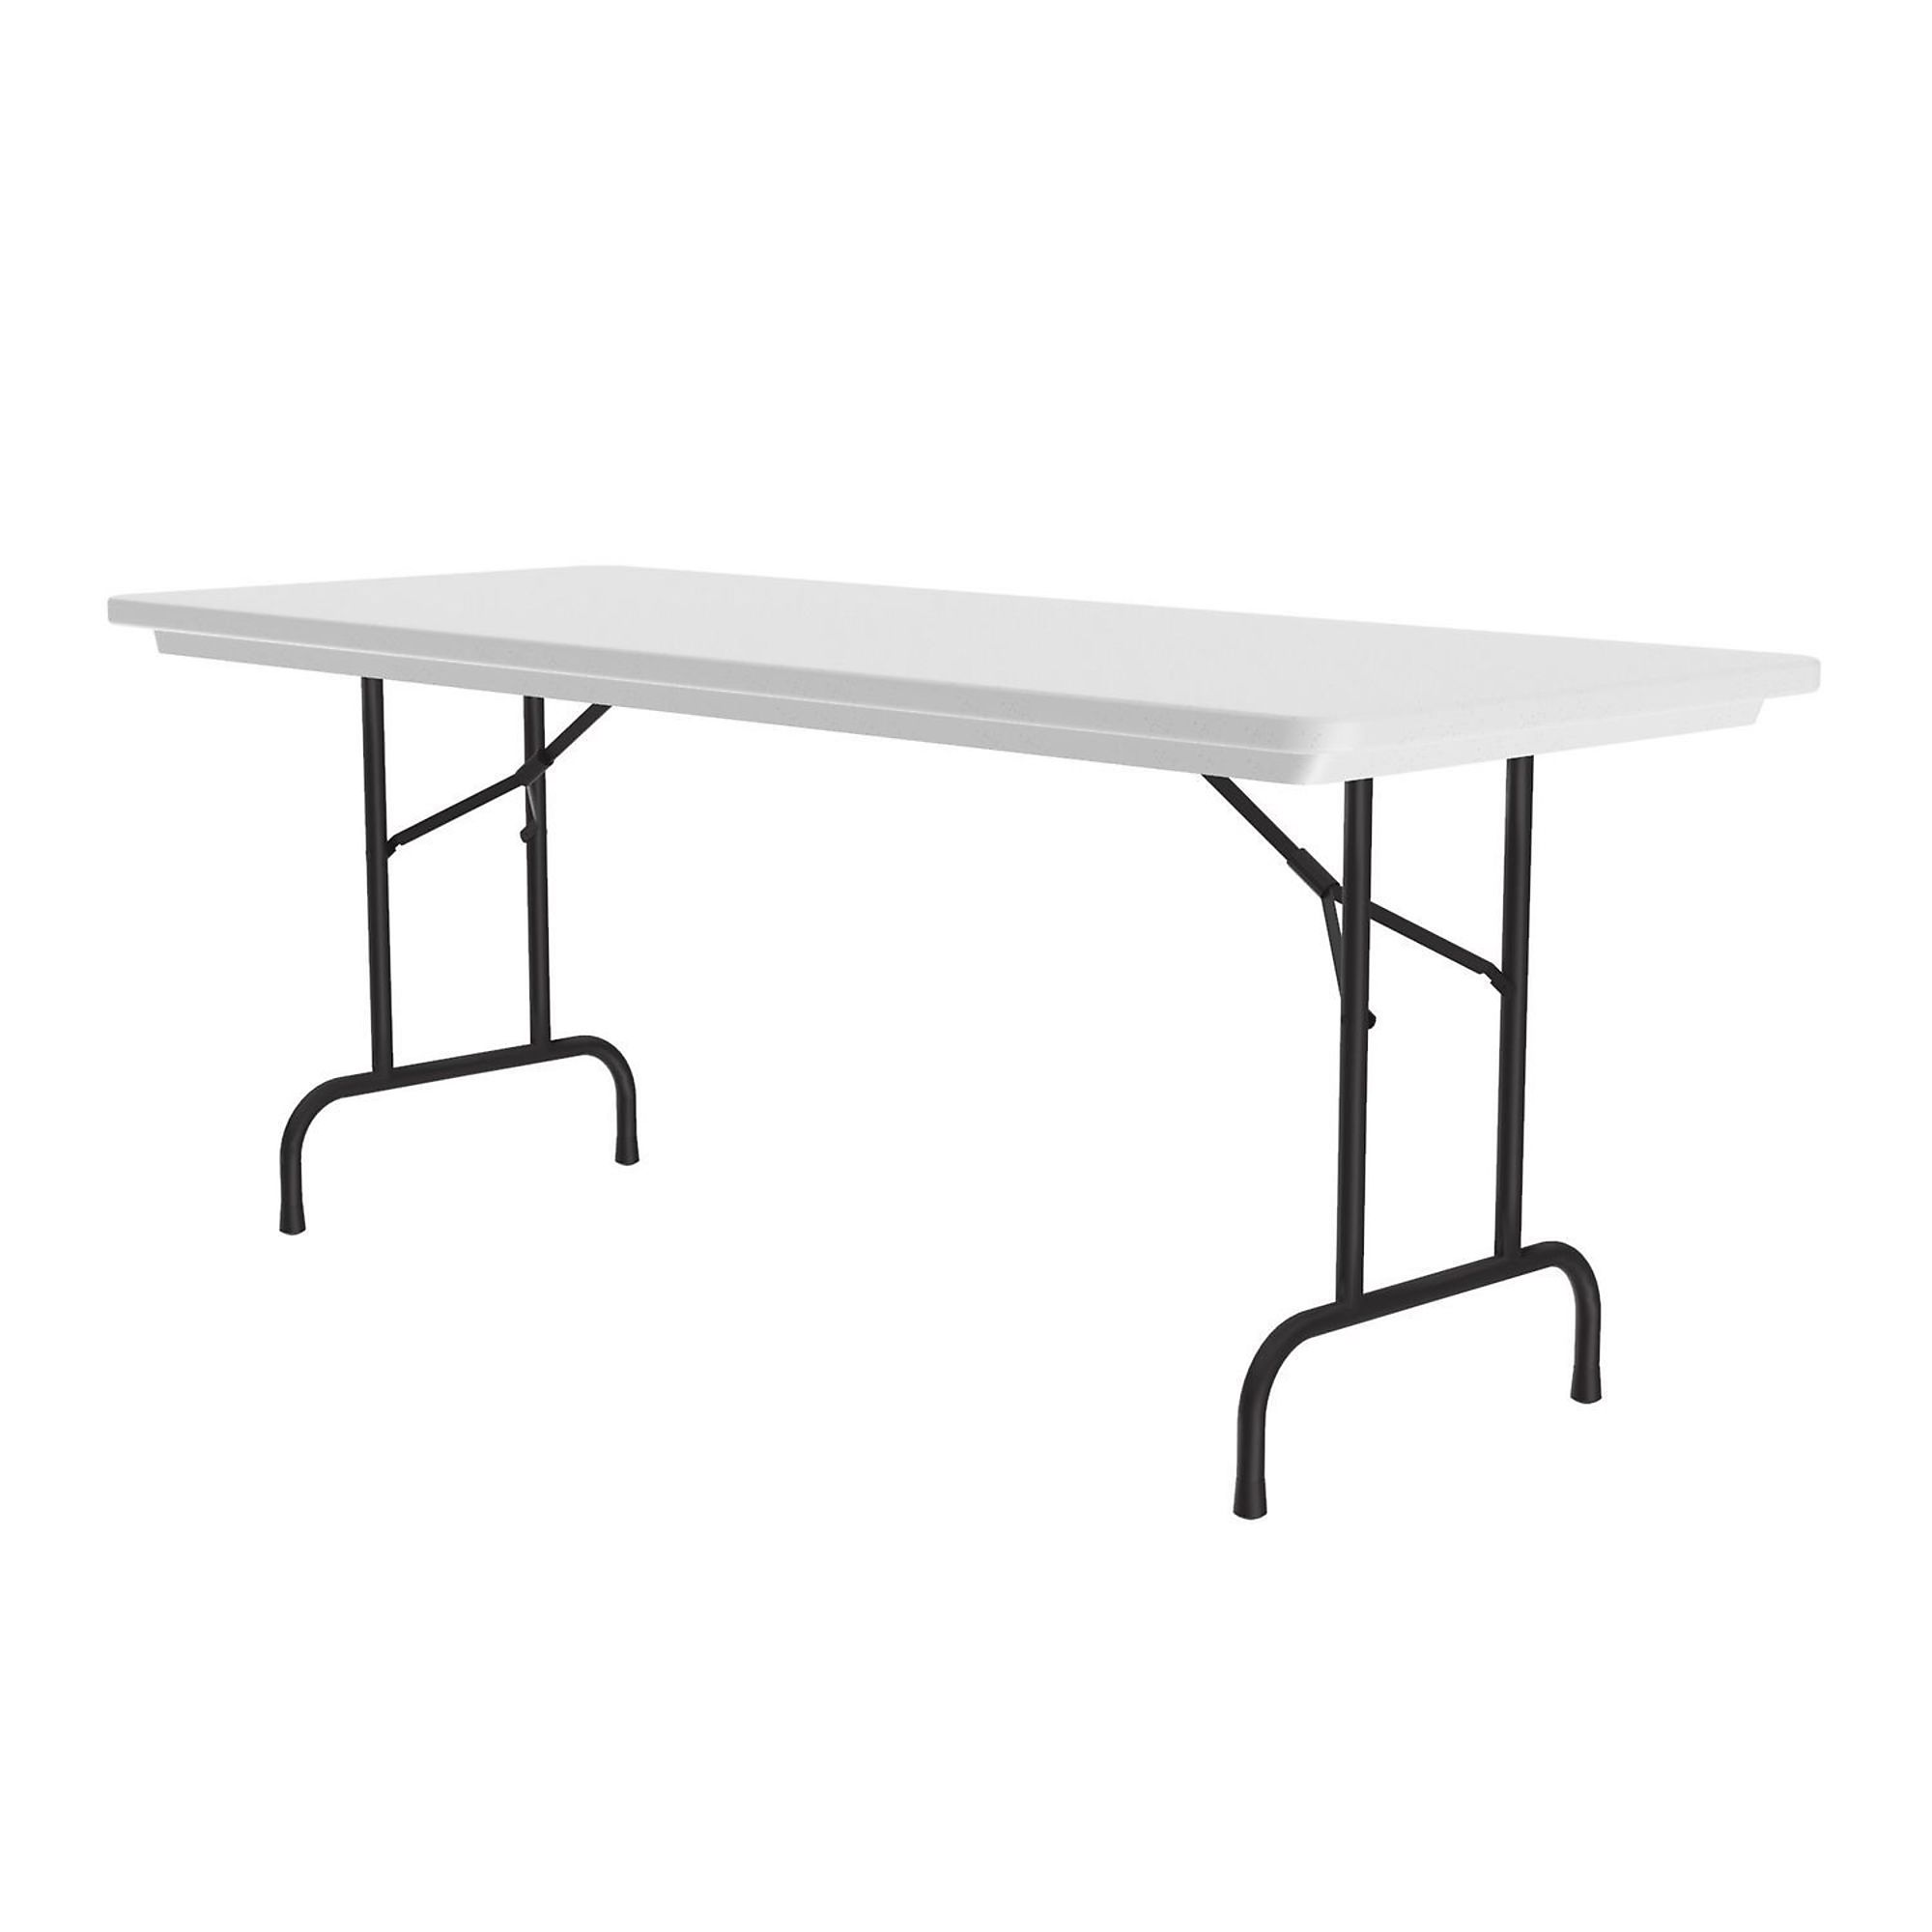 Correll, Plastic Folding Table, Gray Granite Top, 30x60, Height 29 in, Width 30 in, Length 60 in, Model R3060-23